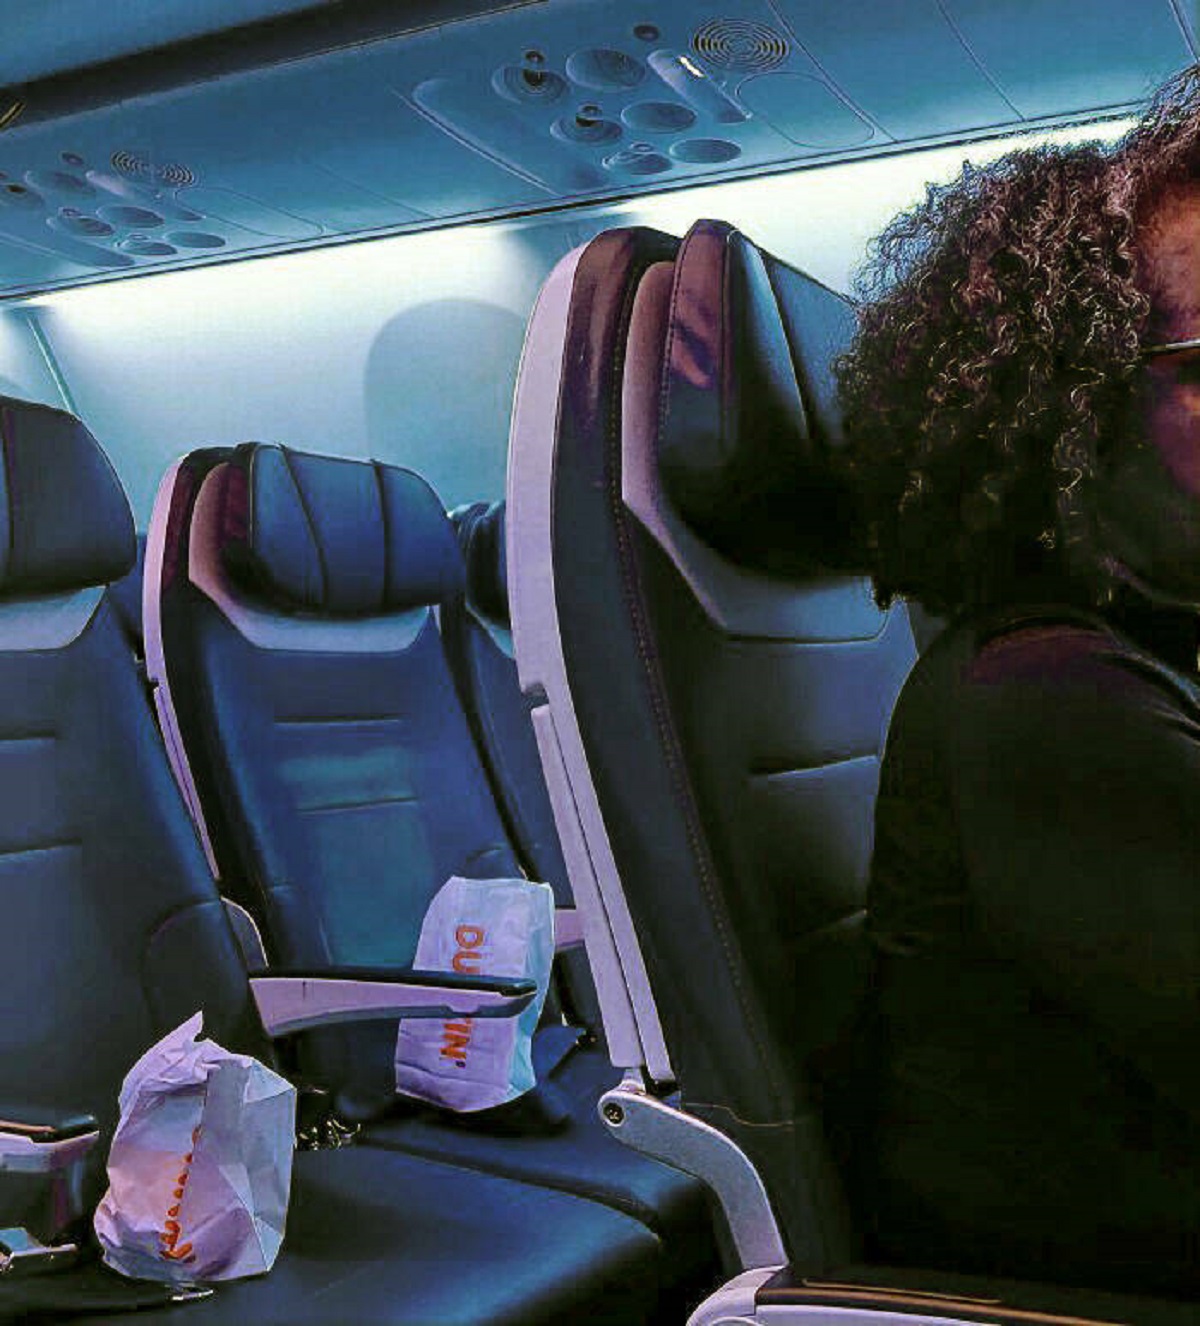 "Woman Saving An Entire Row Of Plane Seats Behind Her With Donut Bags"